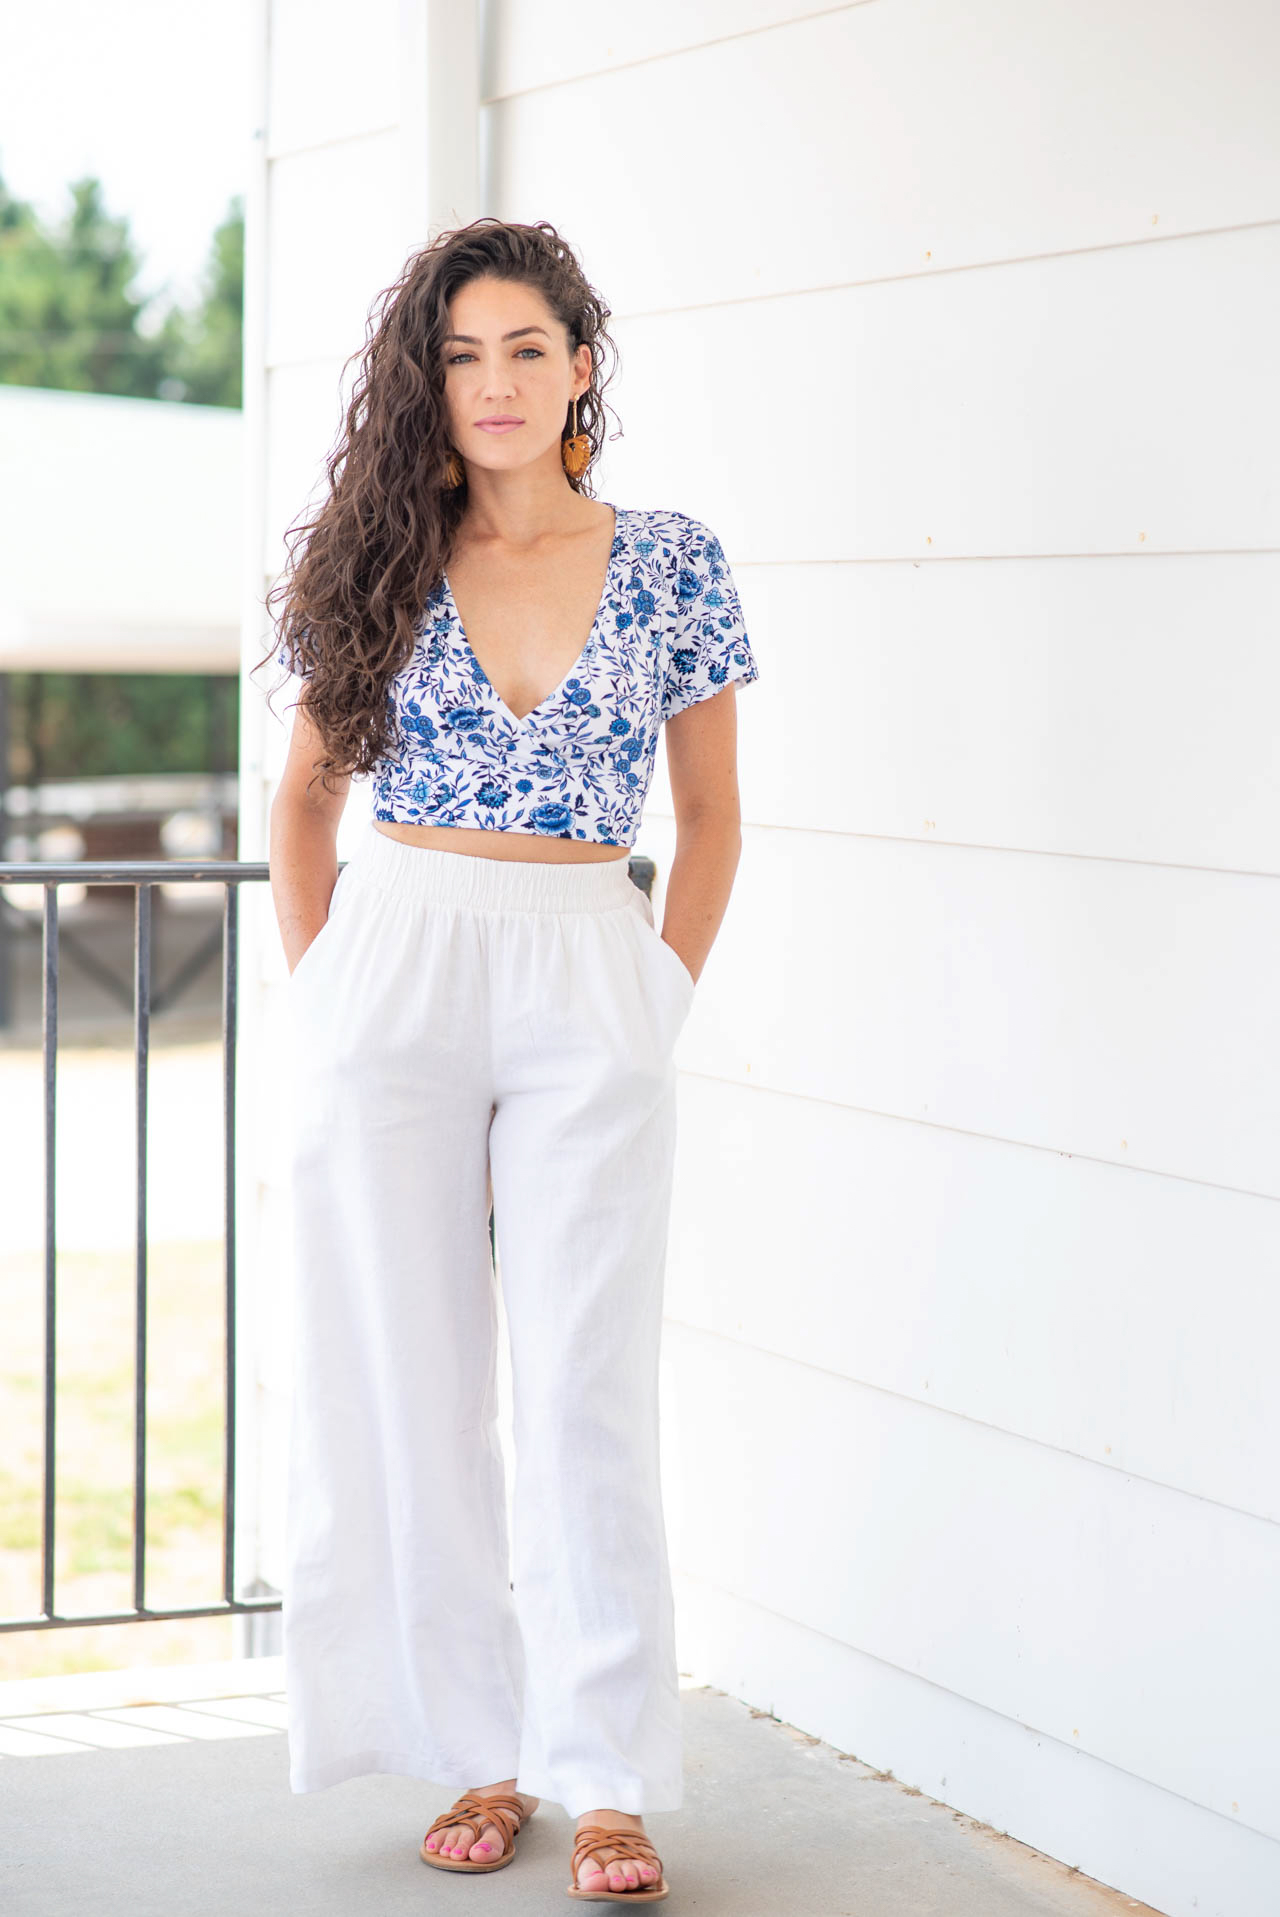 crop top, open back crop top, atlanta blogger, style blogger, live style travel, erica valentin blog, atlanta bloggers, fashion bloggers, floral crop top, summer outfit ideas, boho style, 